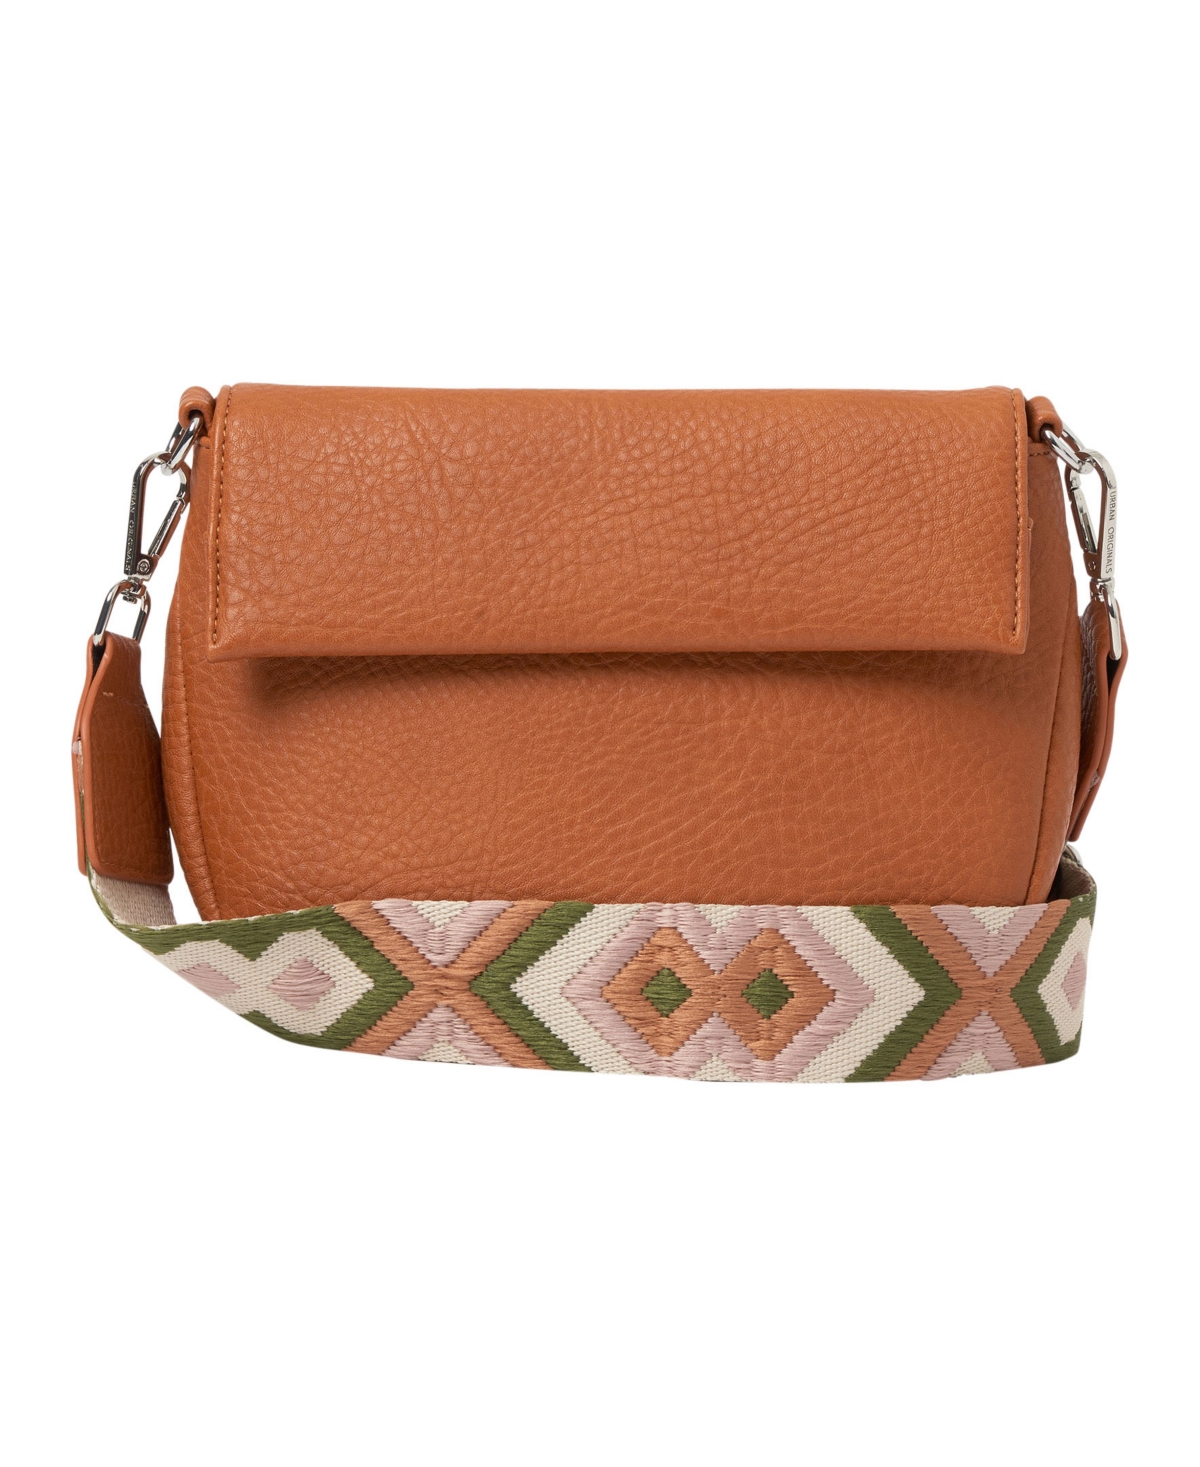 Realism Faux Leather Crossbody Bag - Green